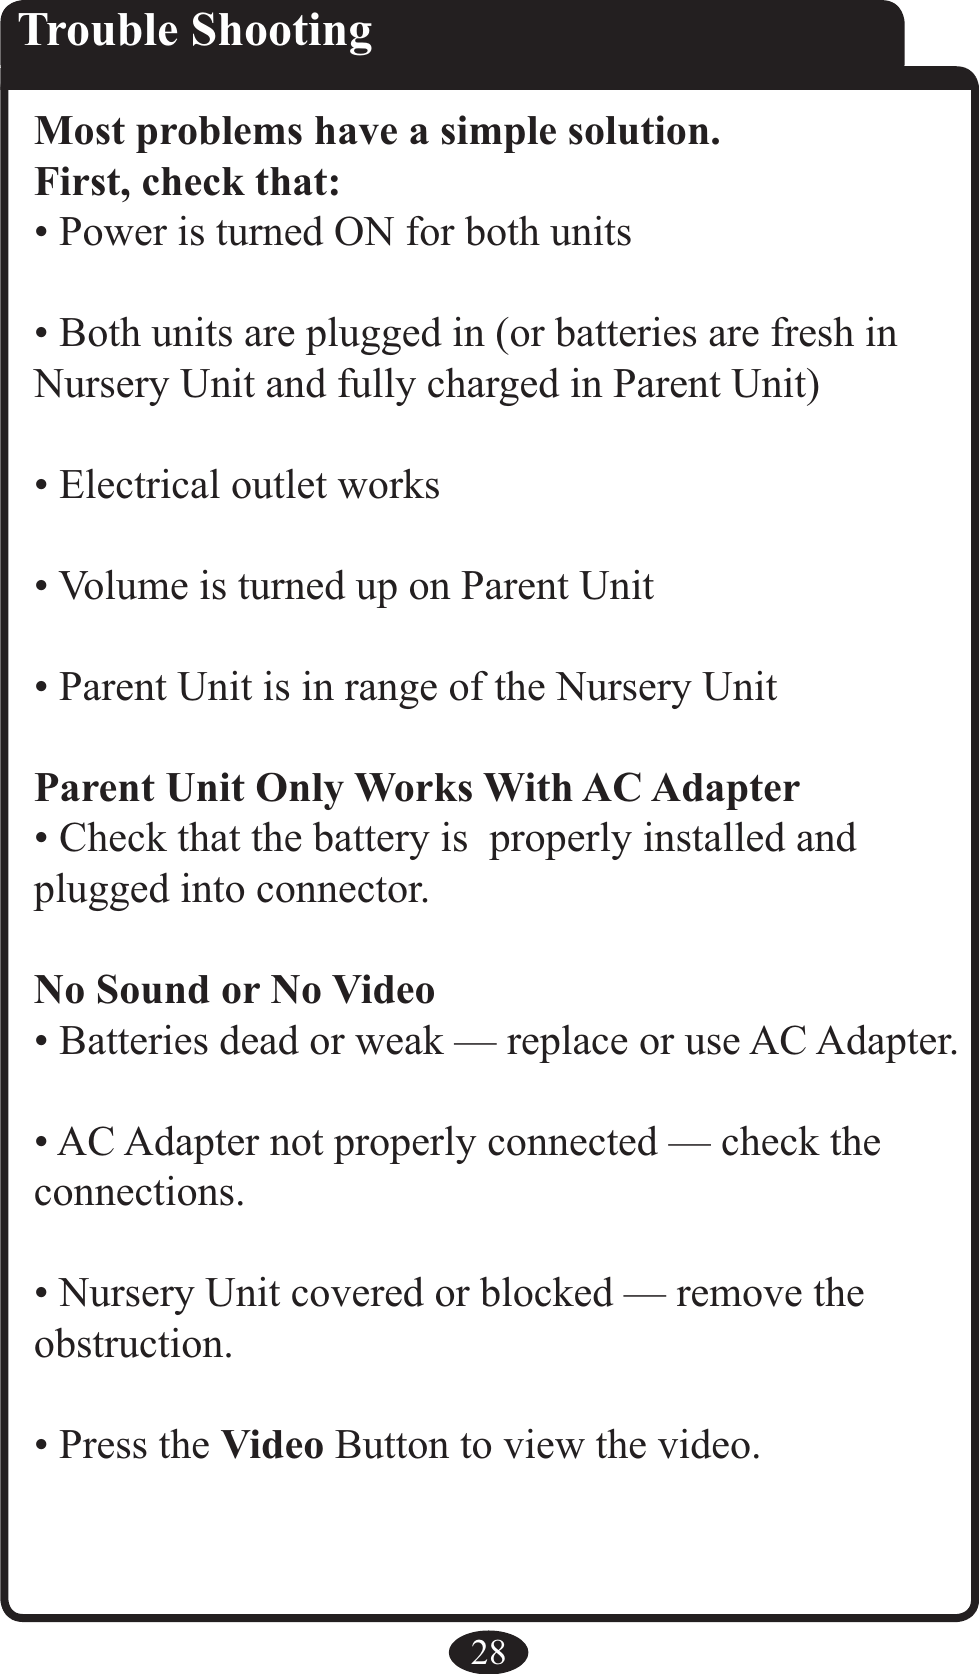 28Trouble ShootingMost problems have a simple solution.First, check that:• Power is turned ON for both units• Both units are plugged in (or batteries are fresh in Nursery Unit and fully charged in Parent Unit)• Electrical outlet works• Volume is turned up on Parent Unit• Parent Unit is in range of the Nursery UnitParent Unit Only Works With AC Adapter• Check that the battery is  properly installed and plugged into connector.No Sound or No Video• Batteries dead or weak — replace or use AC Adapter.• AC Adapter not properly connected — check the  connections.• Nursery Unit covered or blocked — remove the obstruction.• Press the Video Button to view the video. 